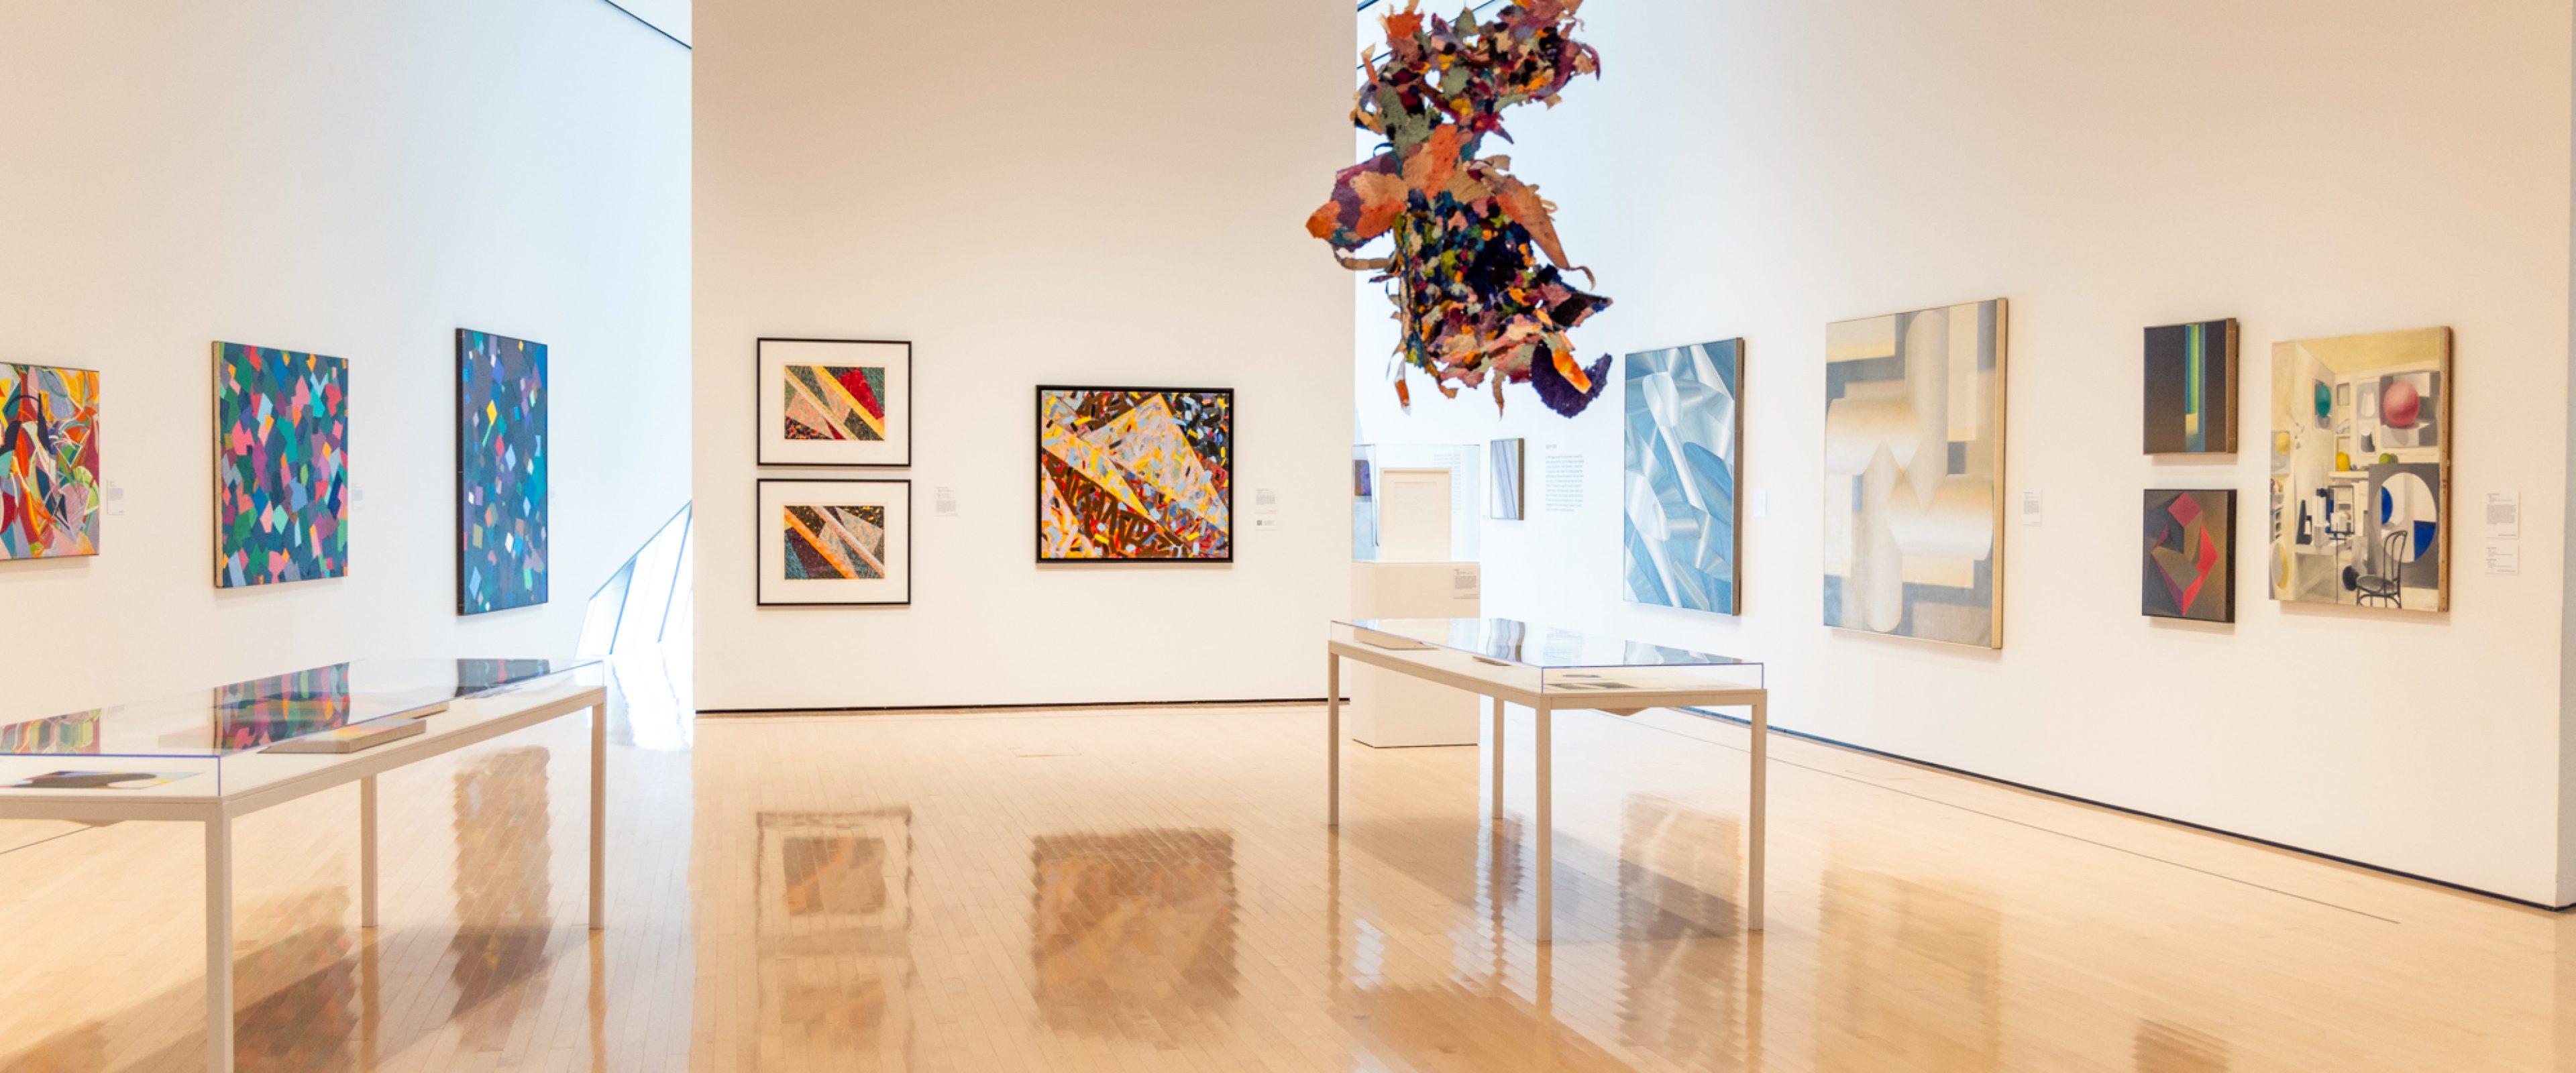 Gallery of abstract paintings on walls and paper structure hanging from above